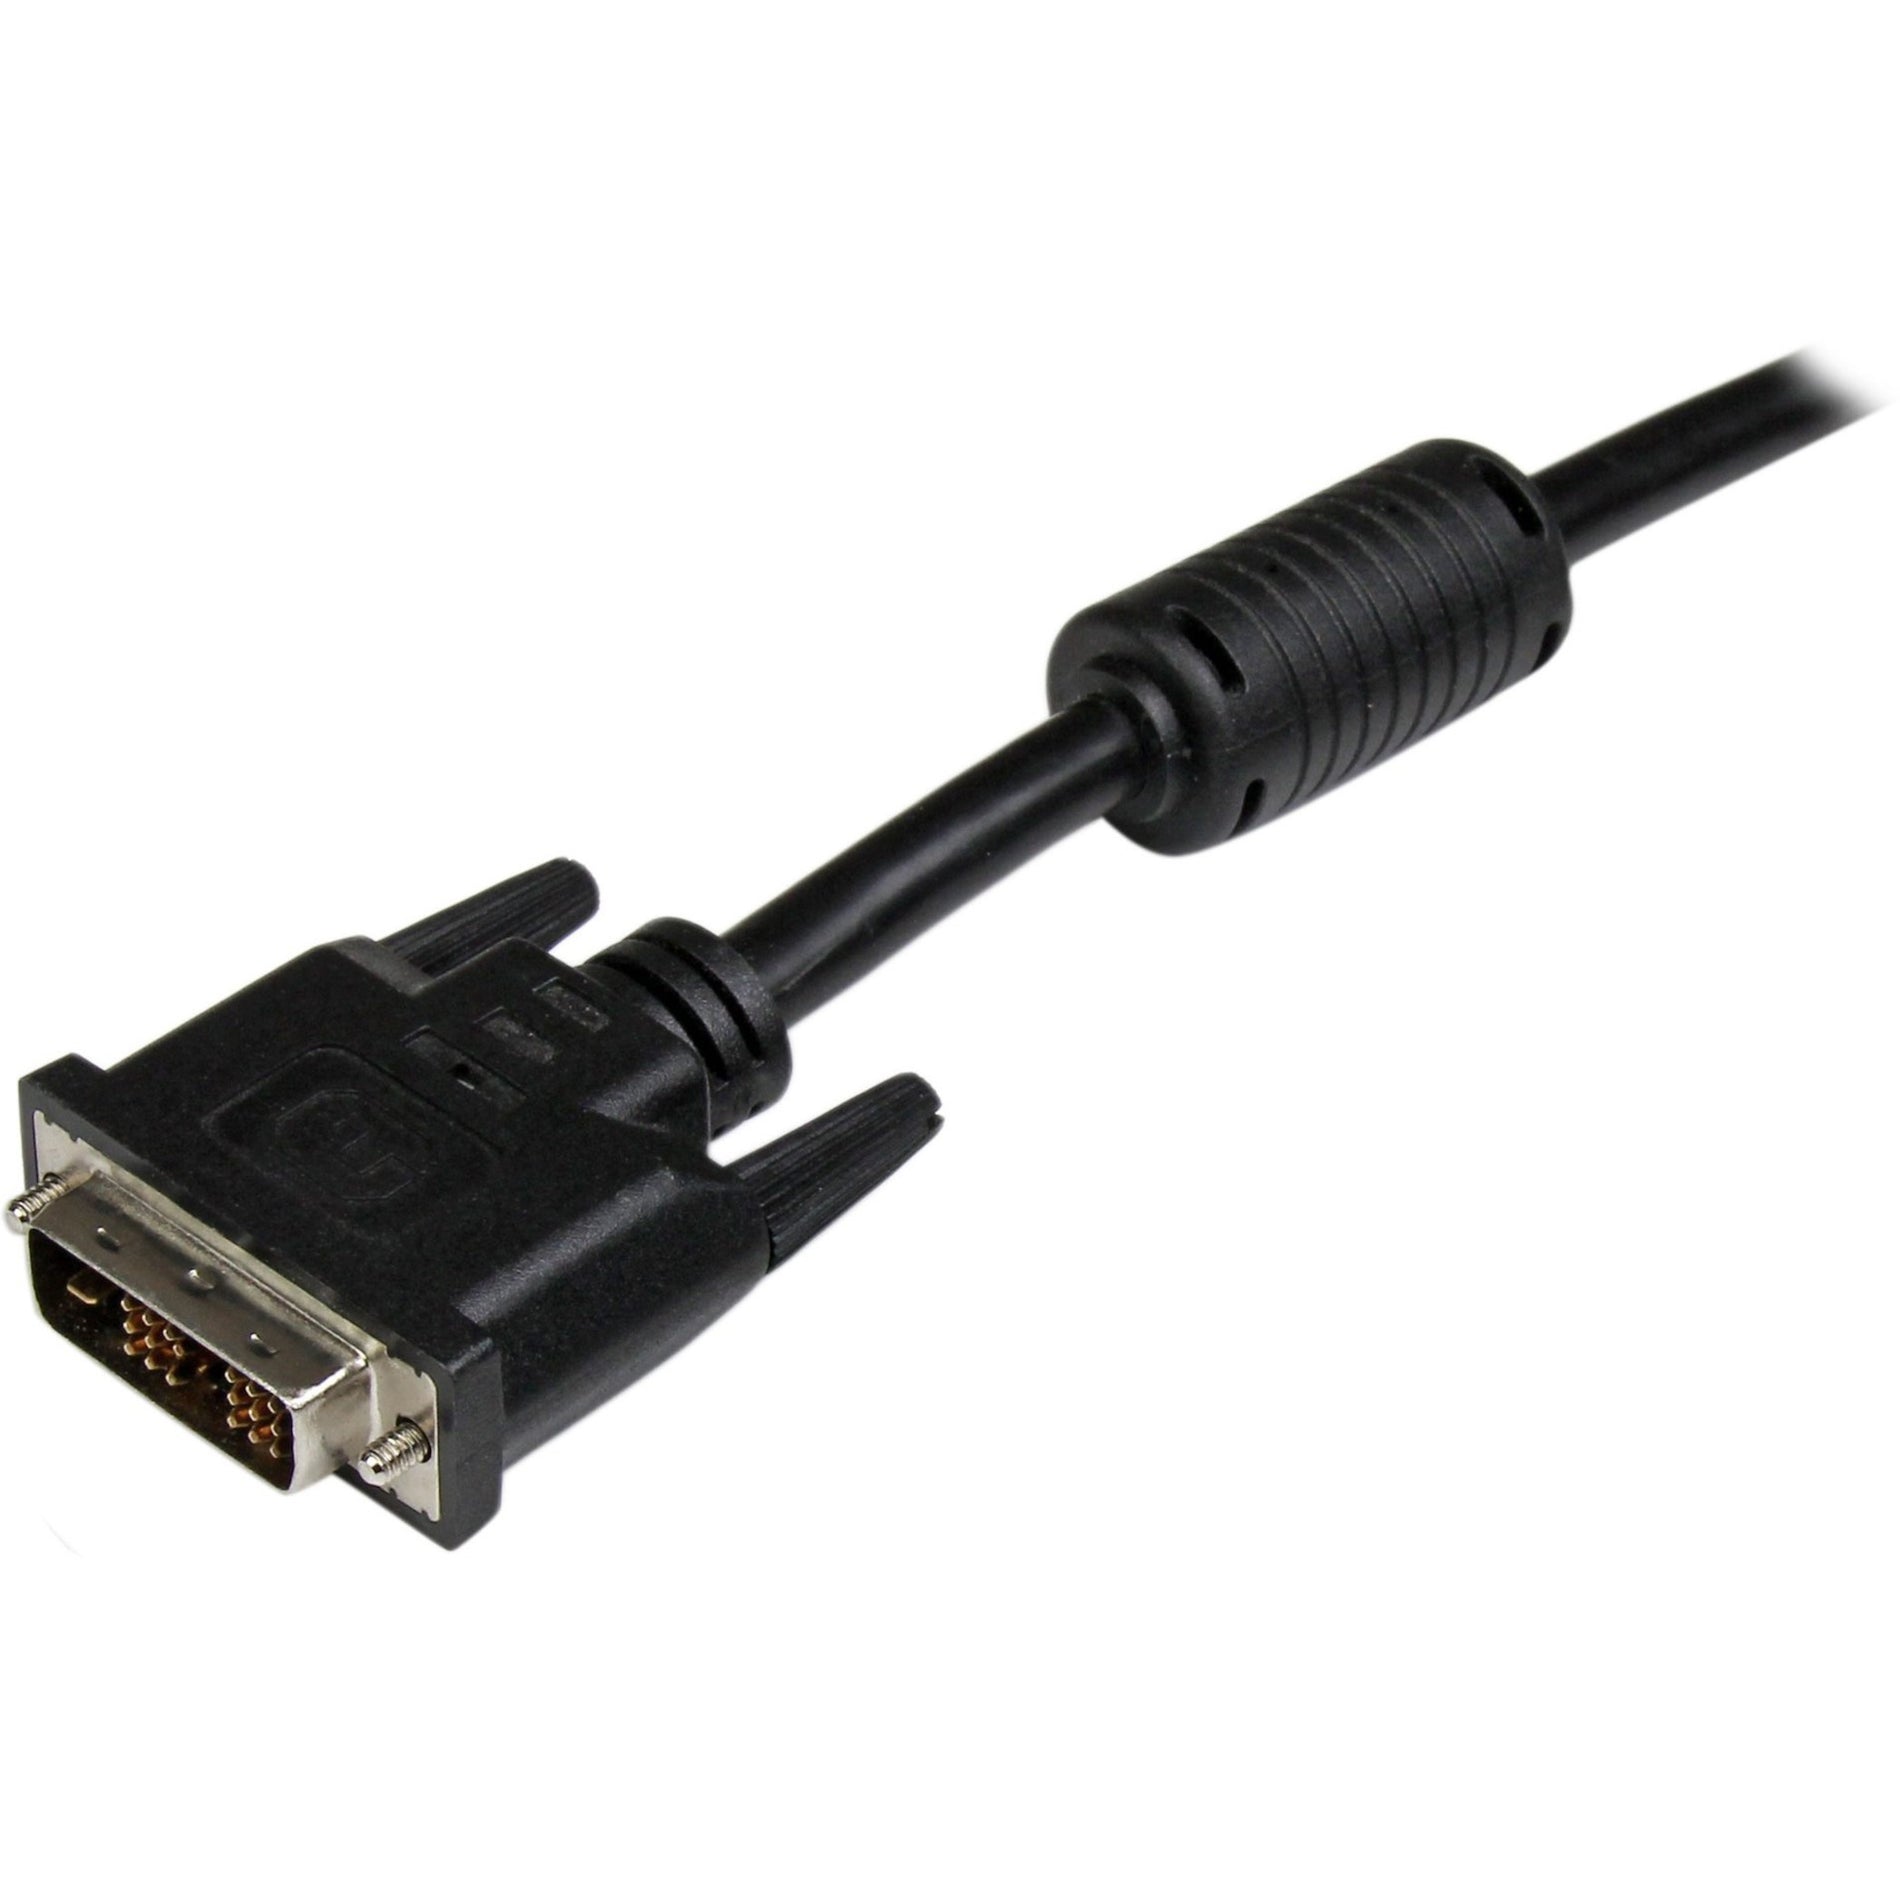 StarTech.com DVIDSMM30 30 ft DVI-D Single Link Cable - M/M, 5 Gbit/s Data Transfer Rate, 1920 x 1200 Supported Resolution